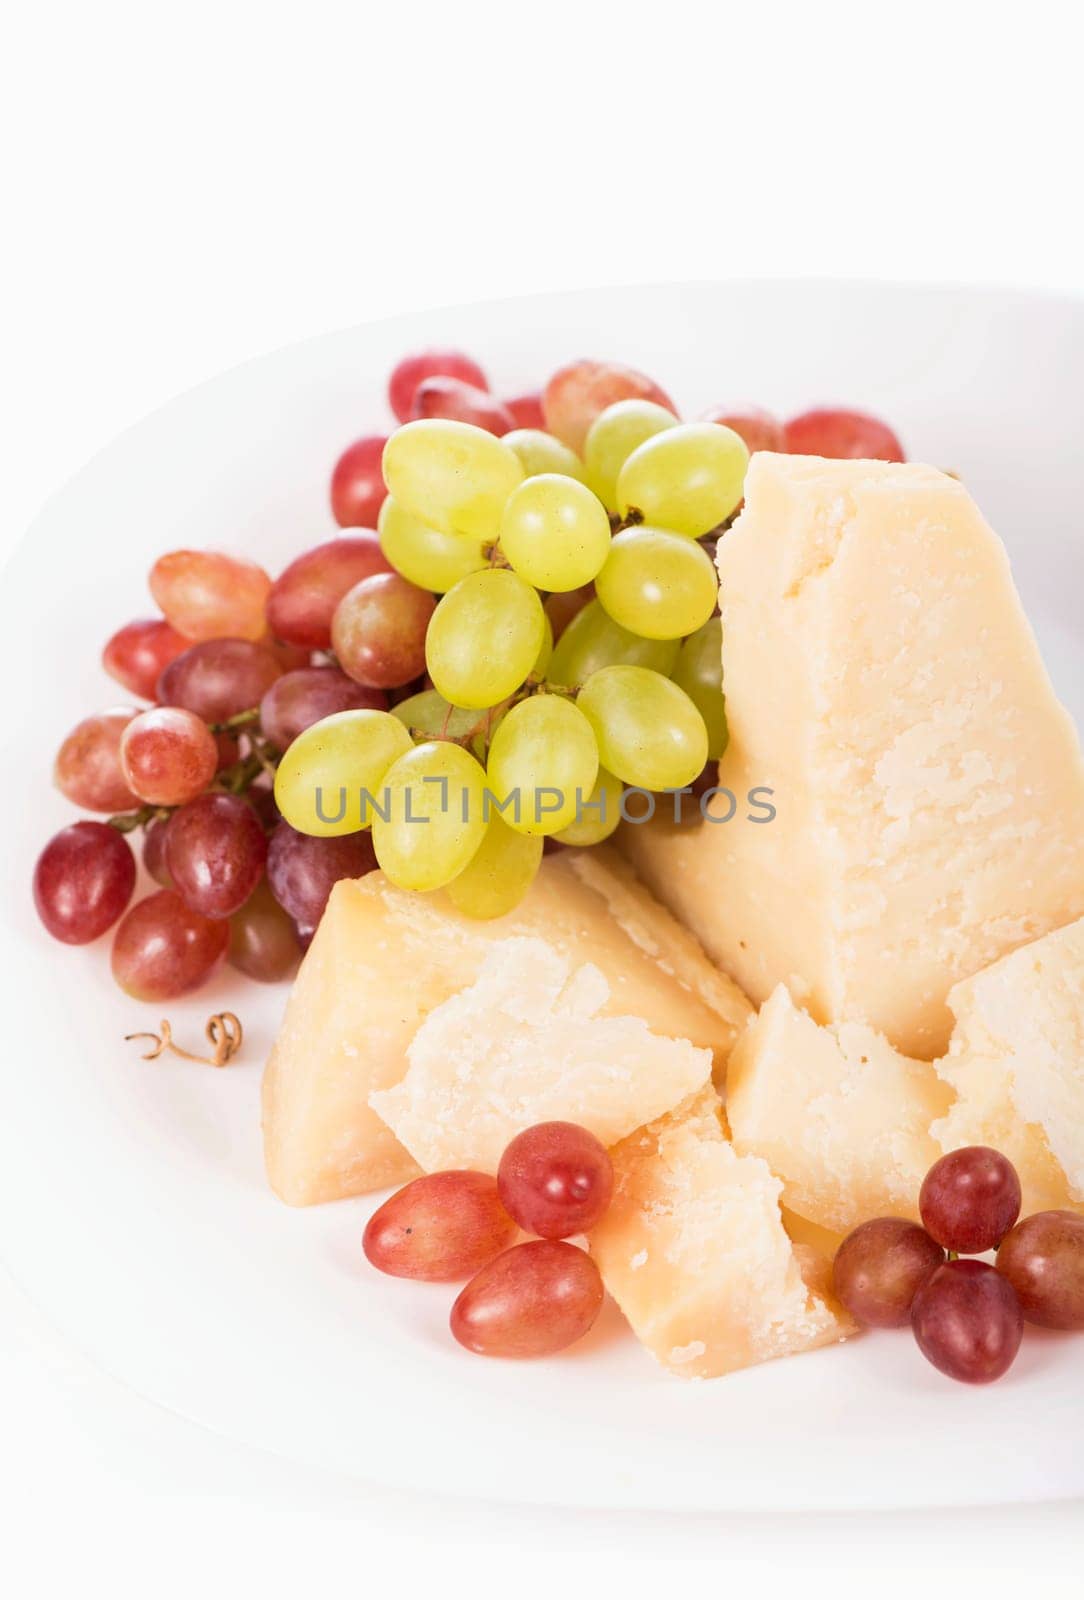 Parmesan cheese and grapes isolated on a white backgroun. View from above